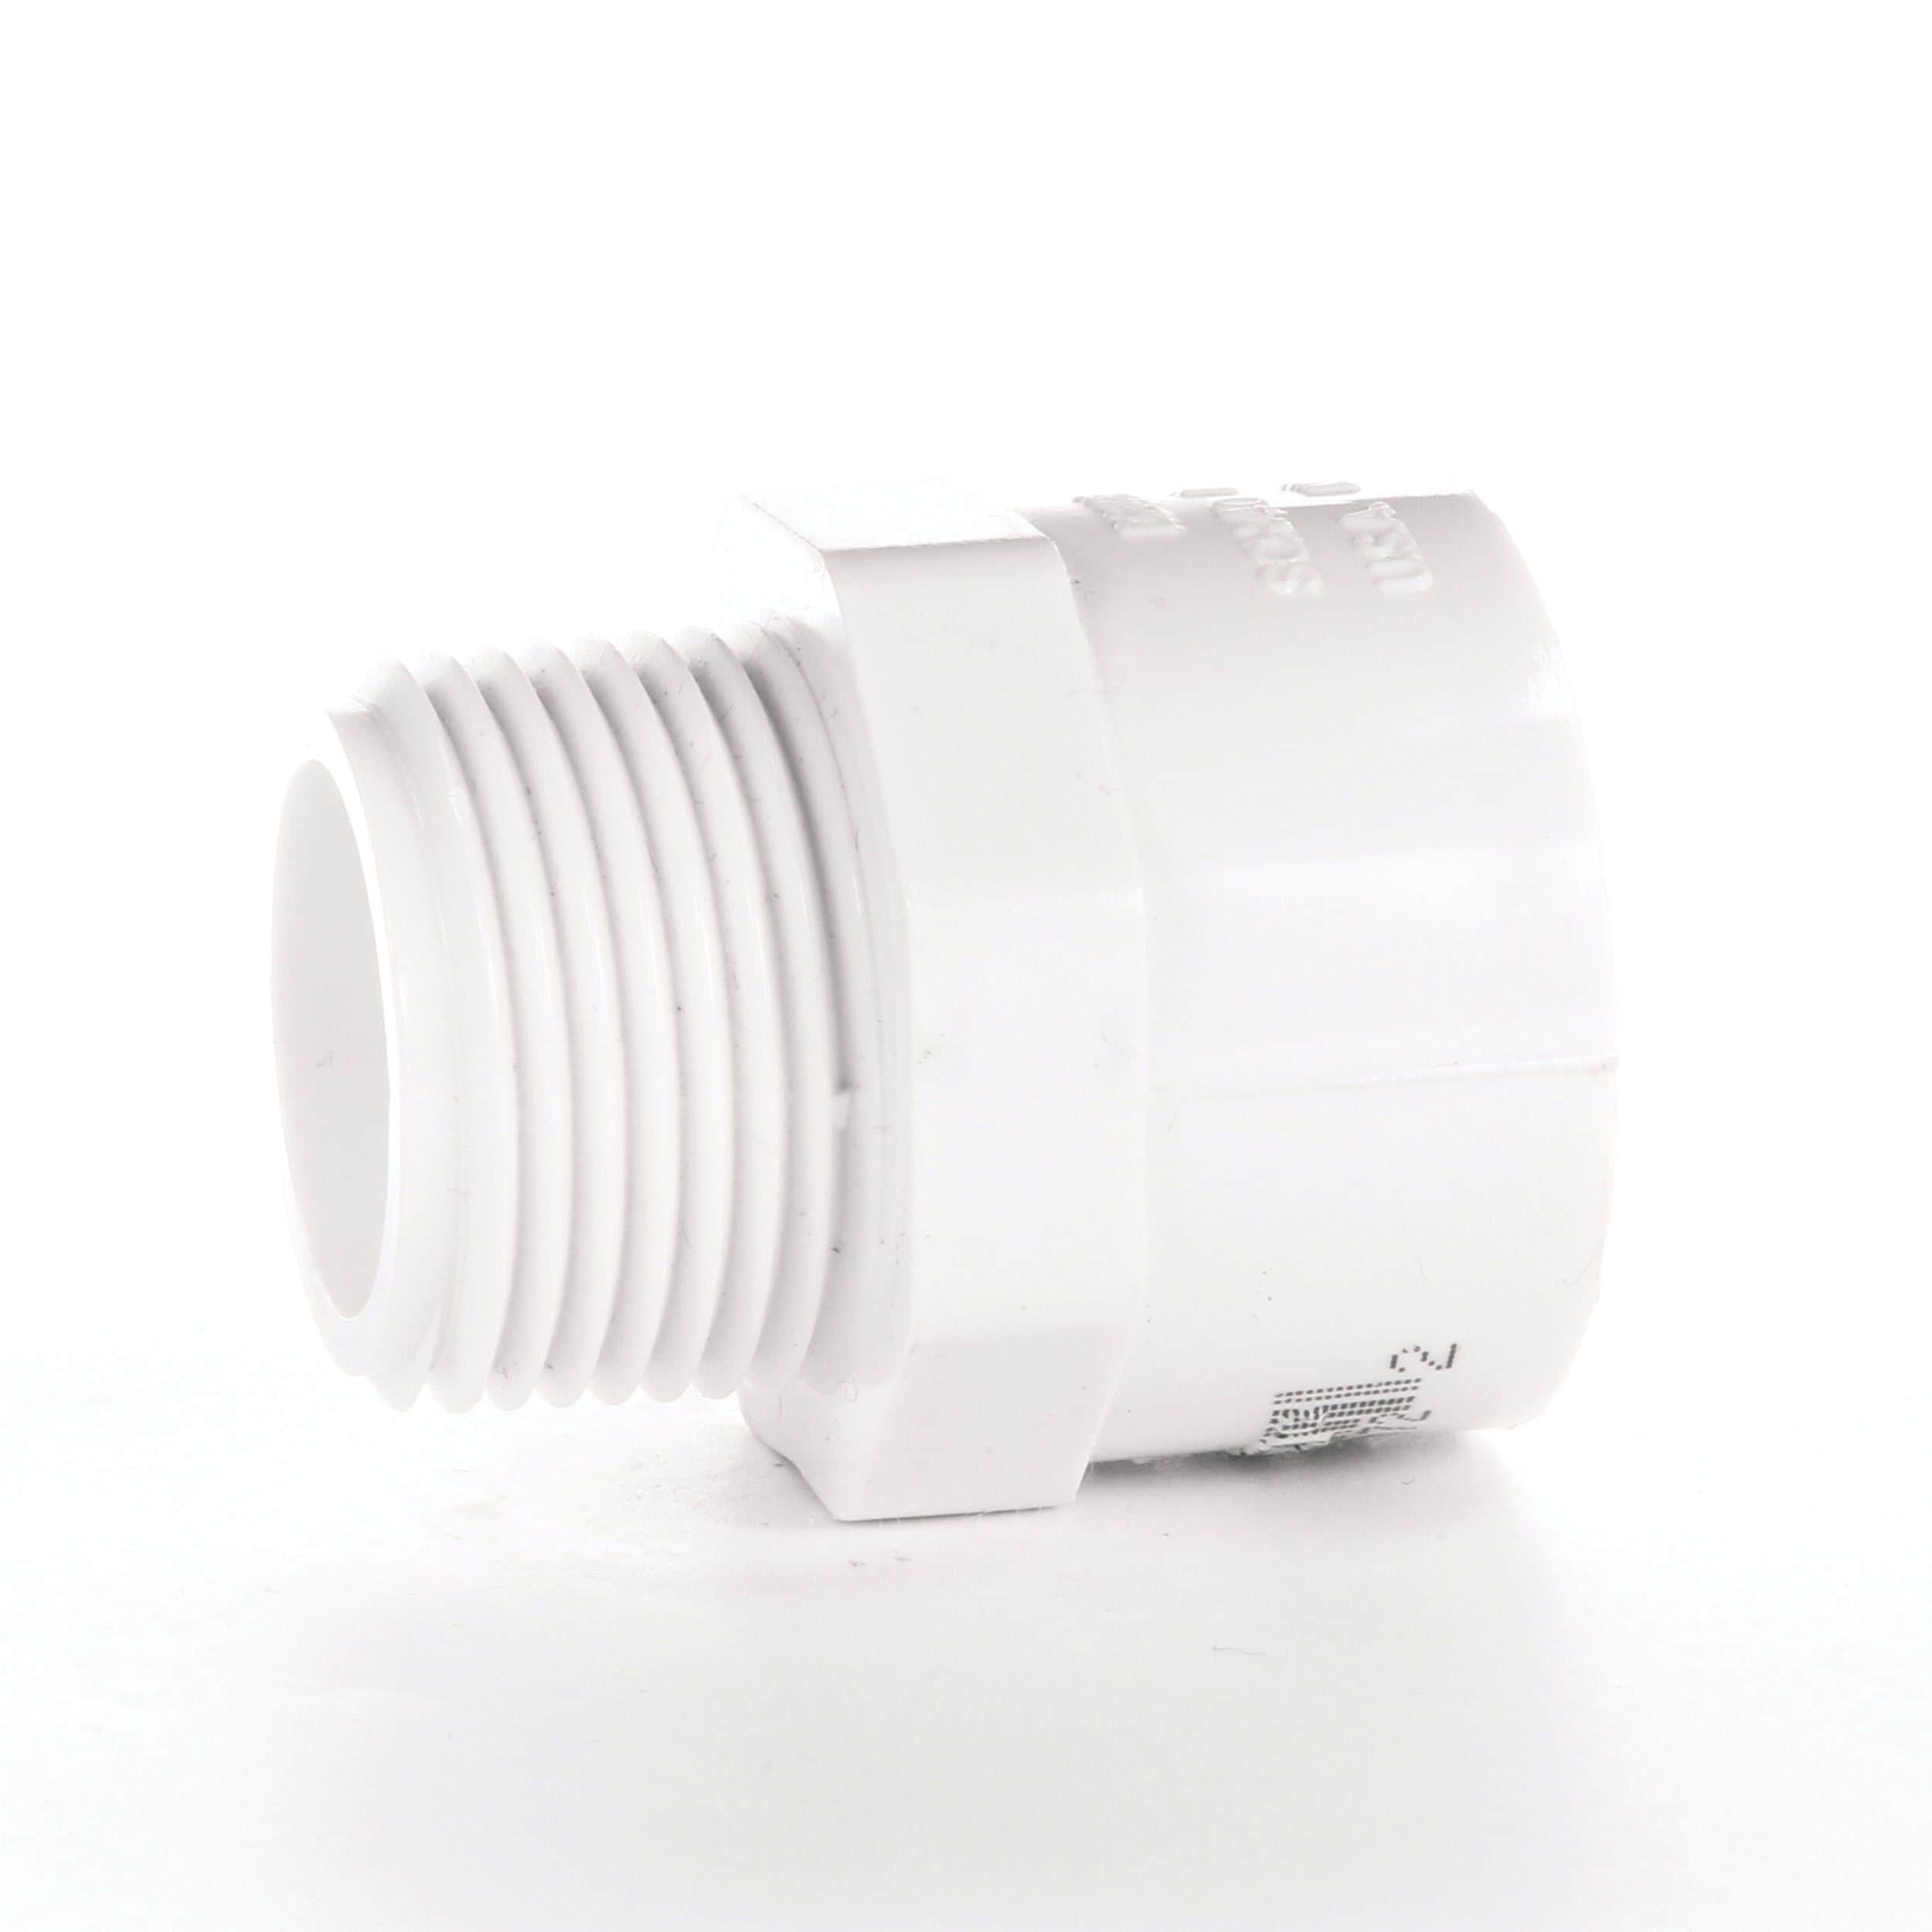 Adapter Pvc Pipe Fittings At Lowes Com